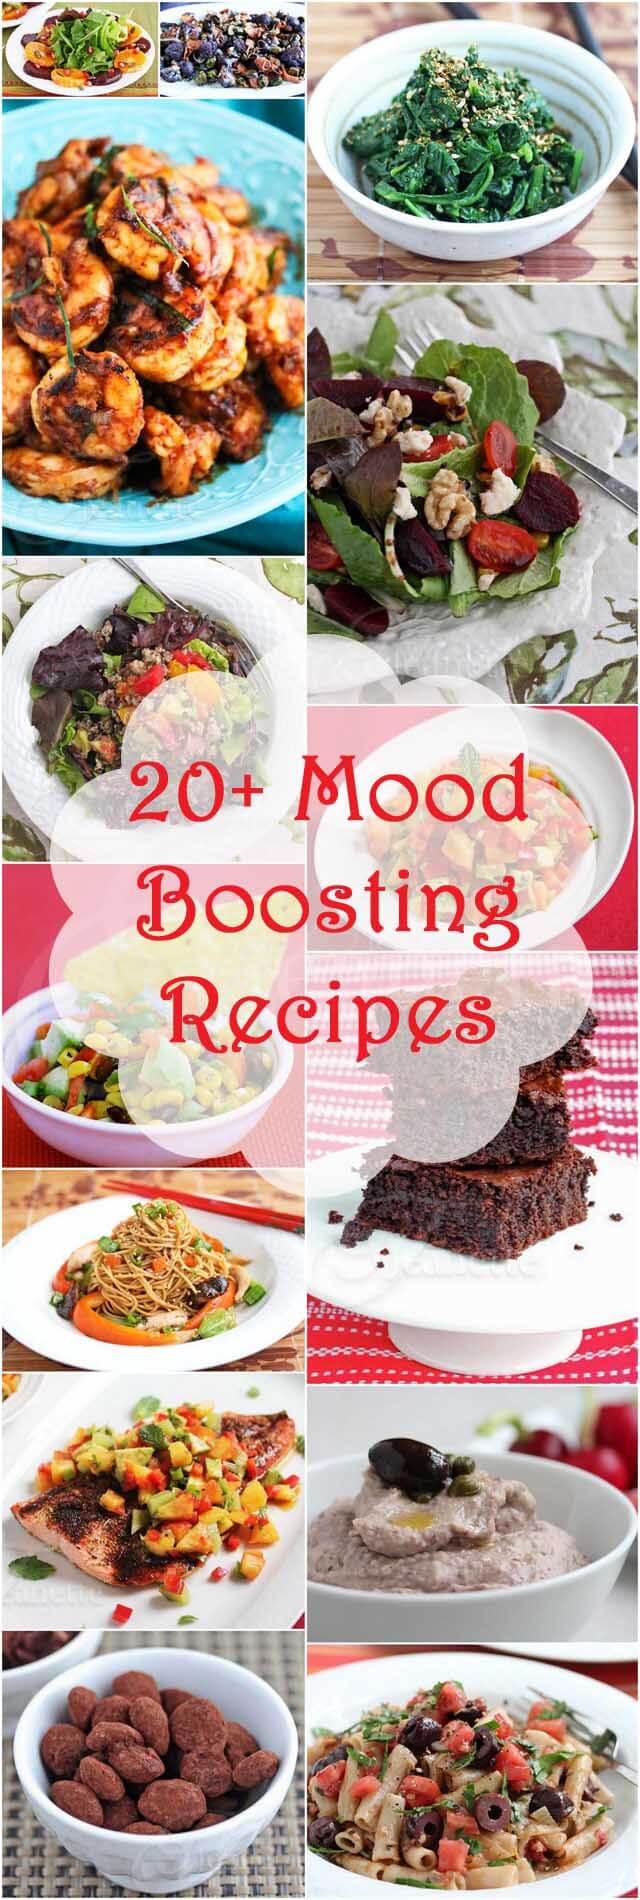 Mood Boosting Recipes © Jeanette's Healthy Living